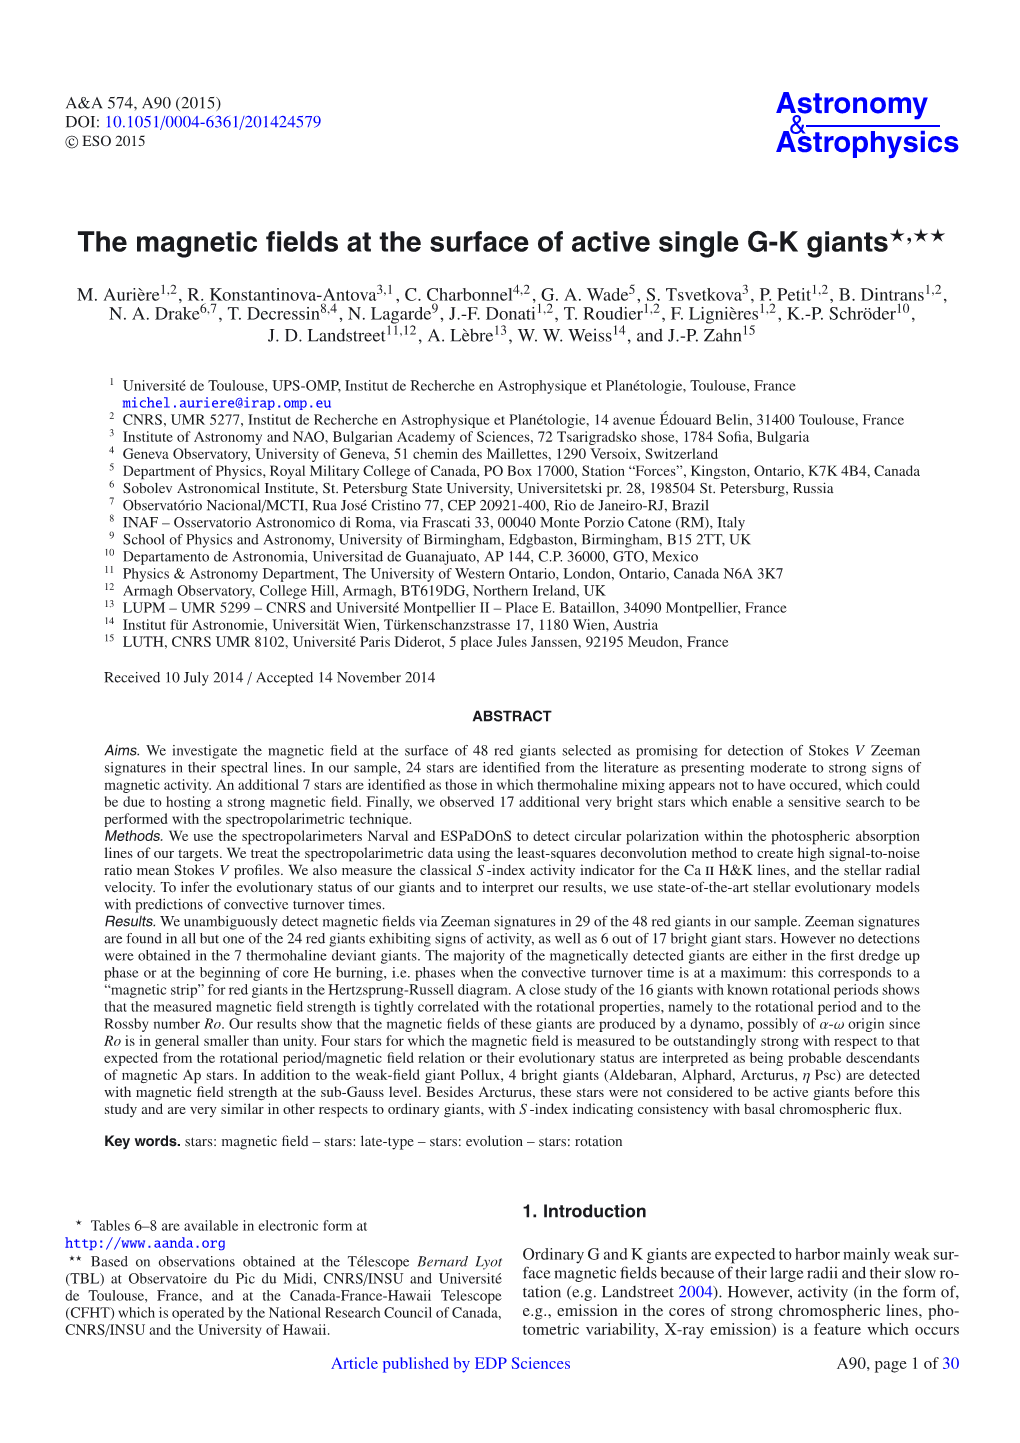 The Magnetic Fields at the Surface of Active Single G-K Giants